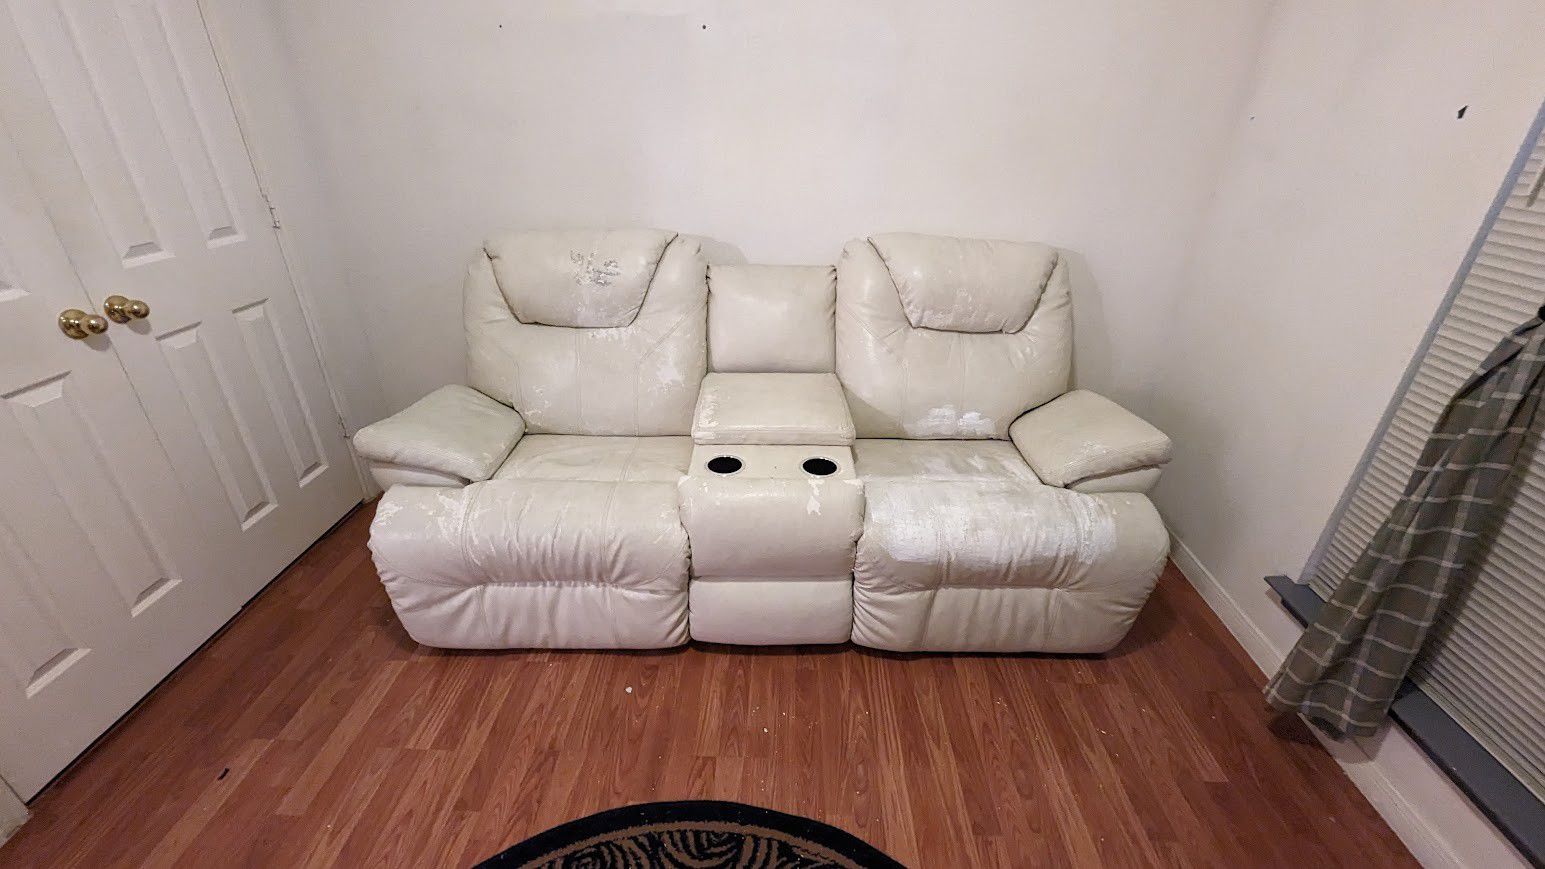 Media Couch For Gaming $60